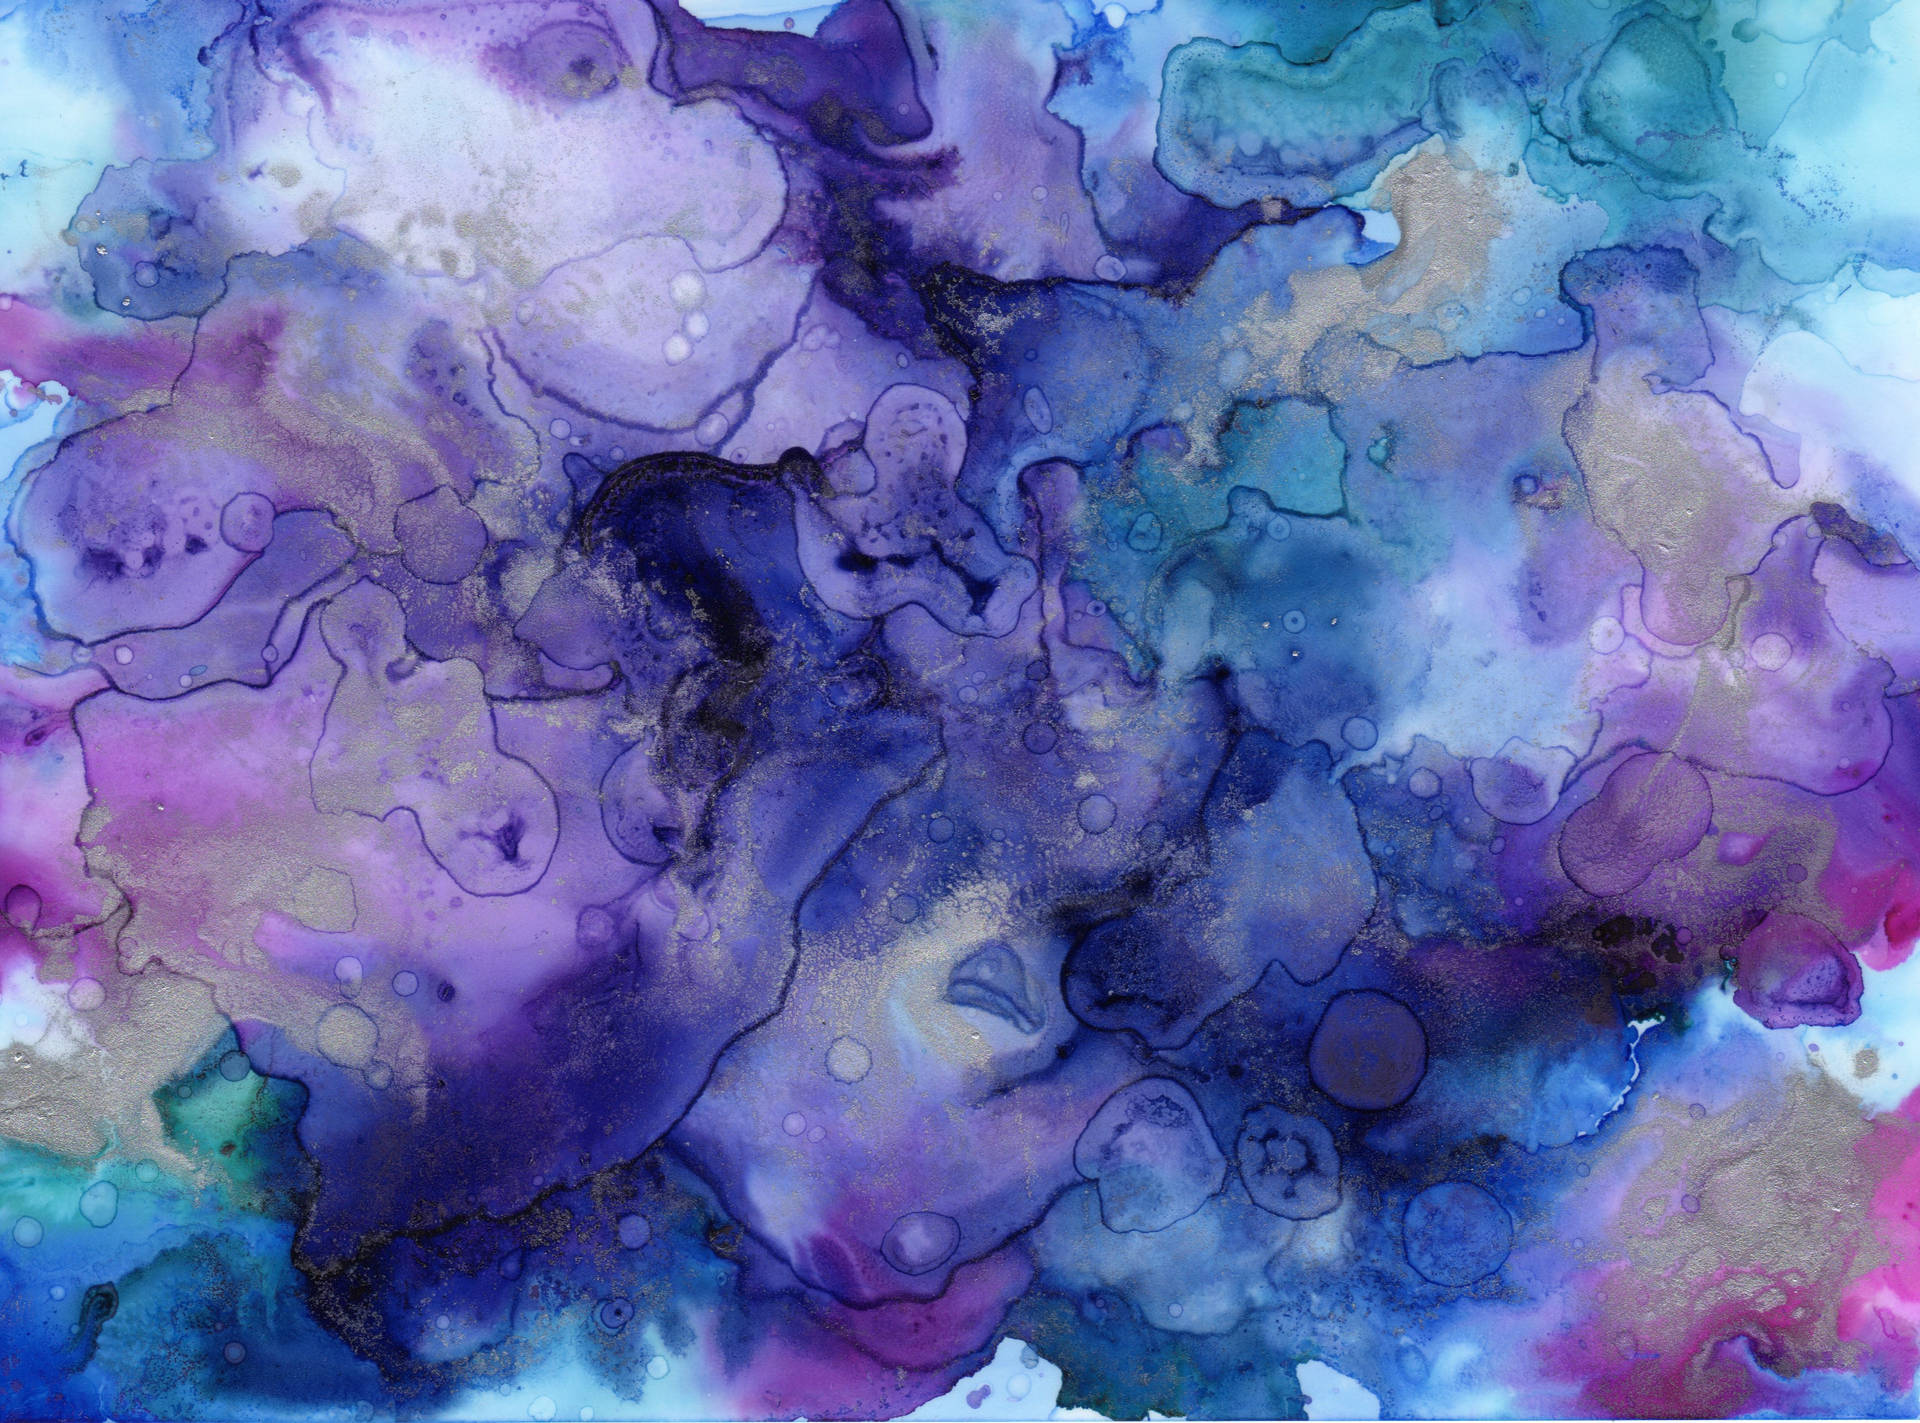 Watercolor 4432X3284 Wallpaper and Background Image